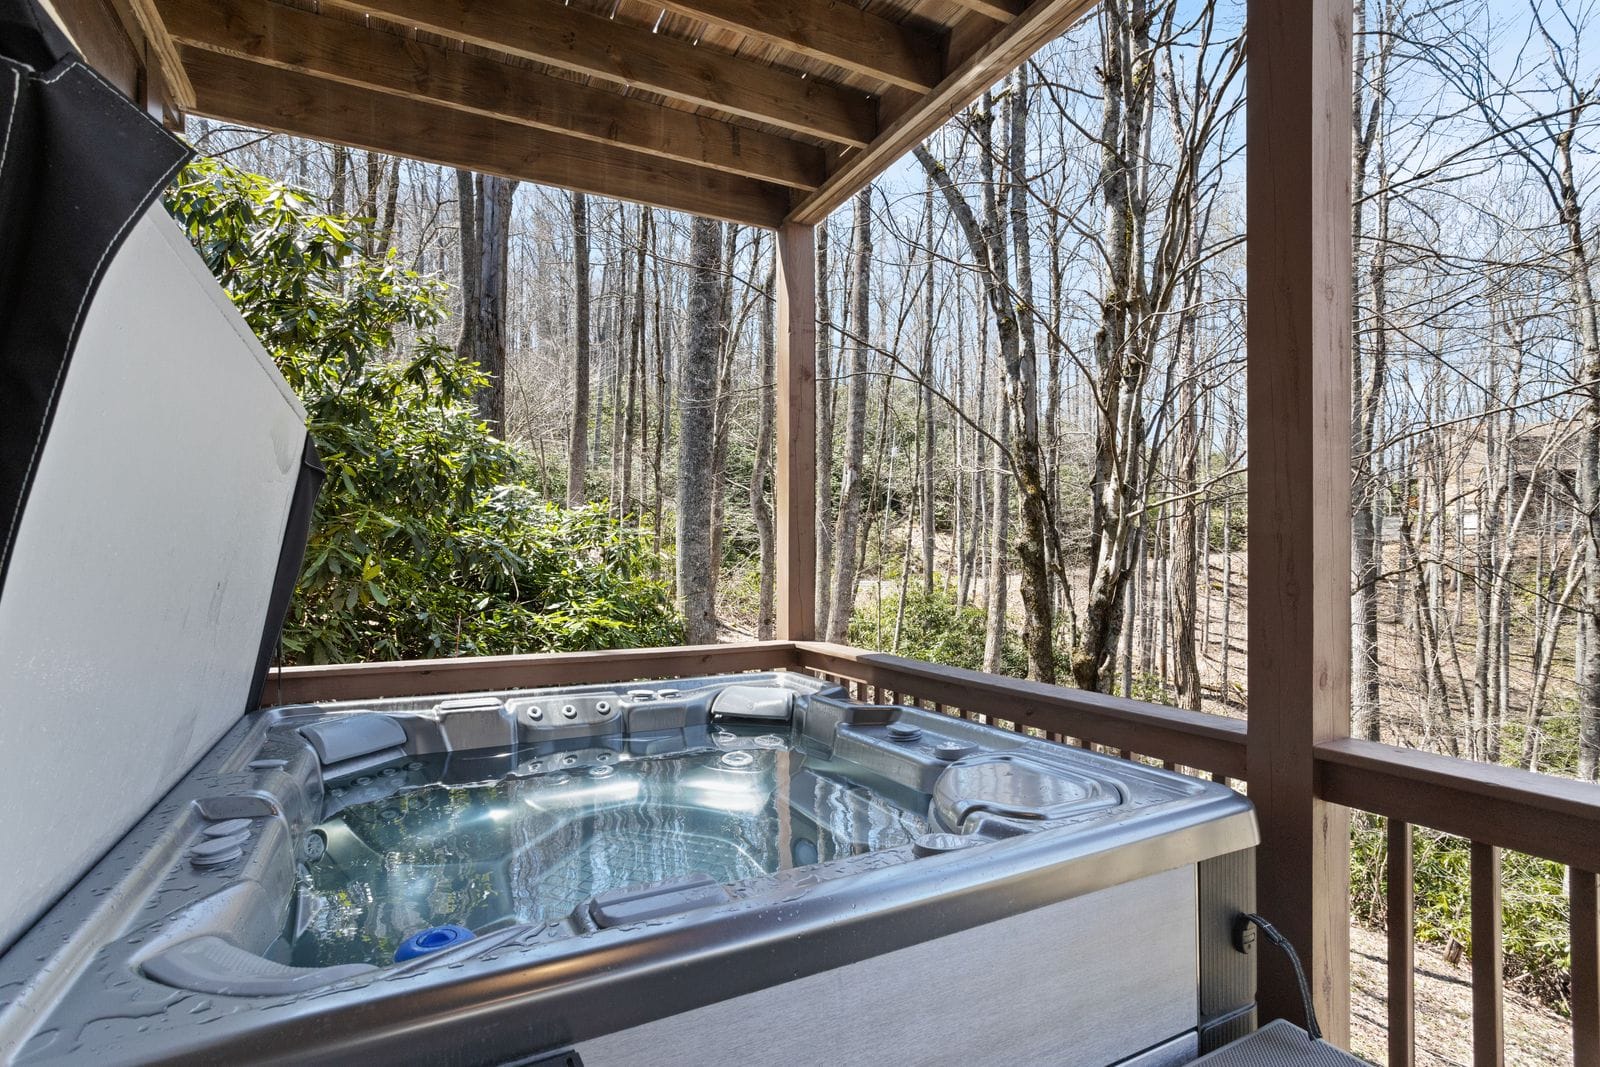 Hot Tub on the Covered Deck with Wooded Surroundings